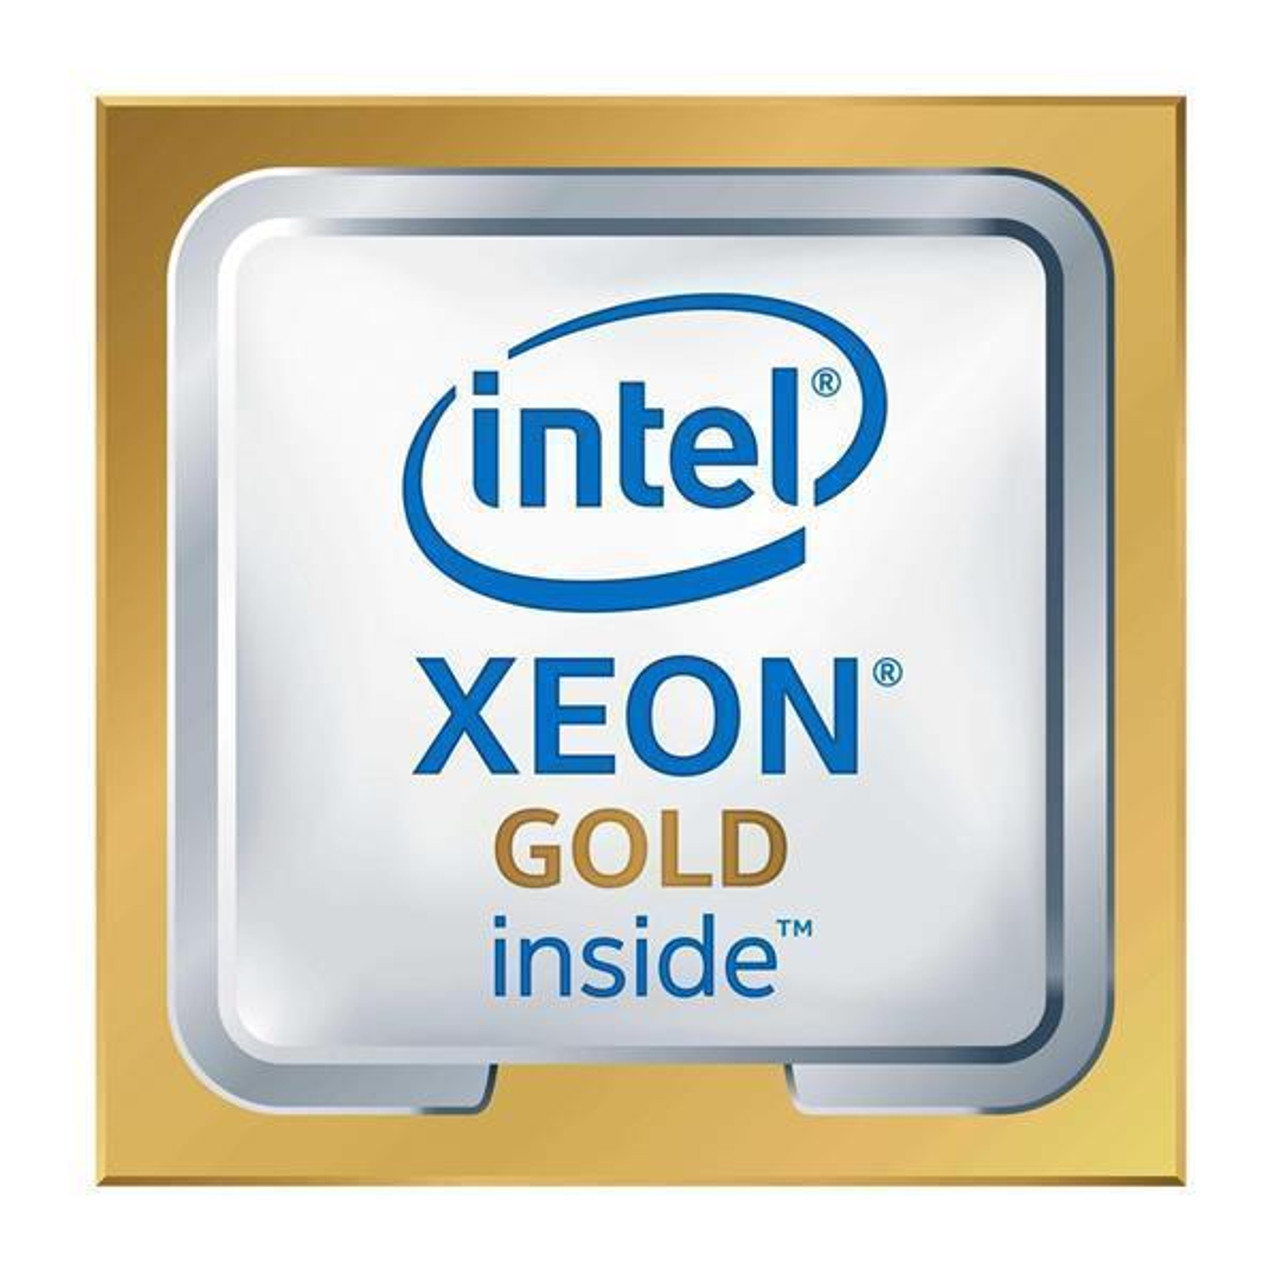 HPE 2.10GHz 24-Core 36MB L3 Cache Socket FCLGA4189 Intel Xeon Gold 5318N Processor Upgrade for Edgeline E920